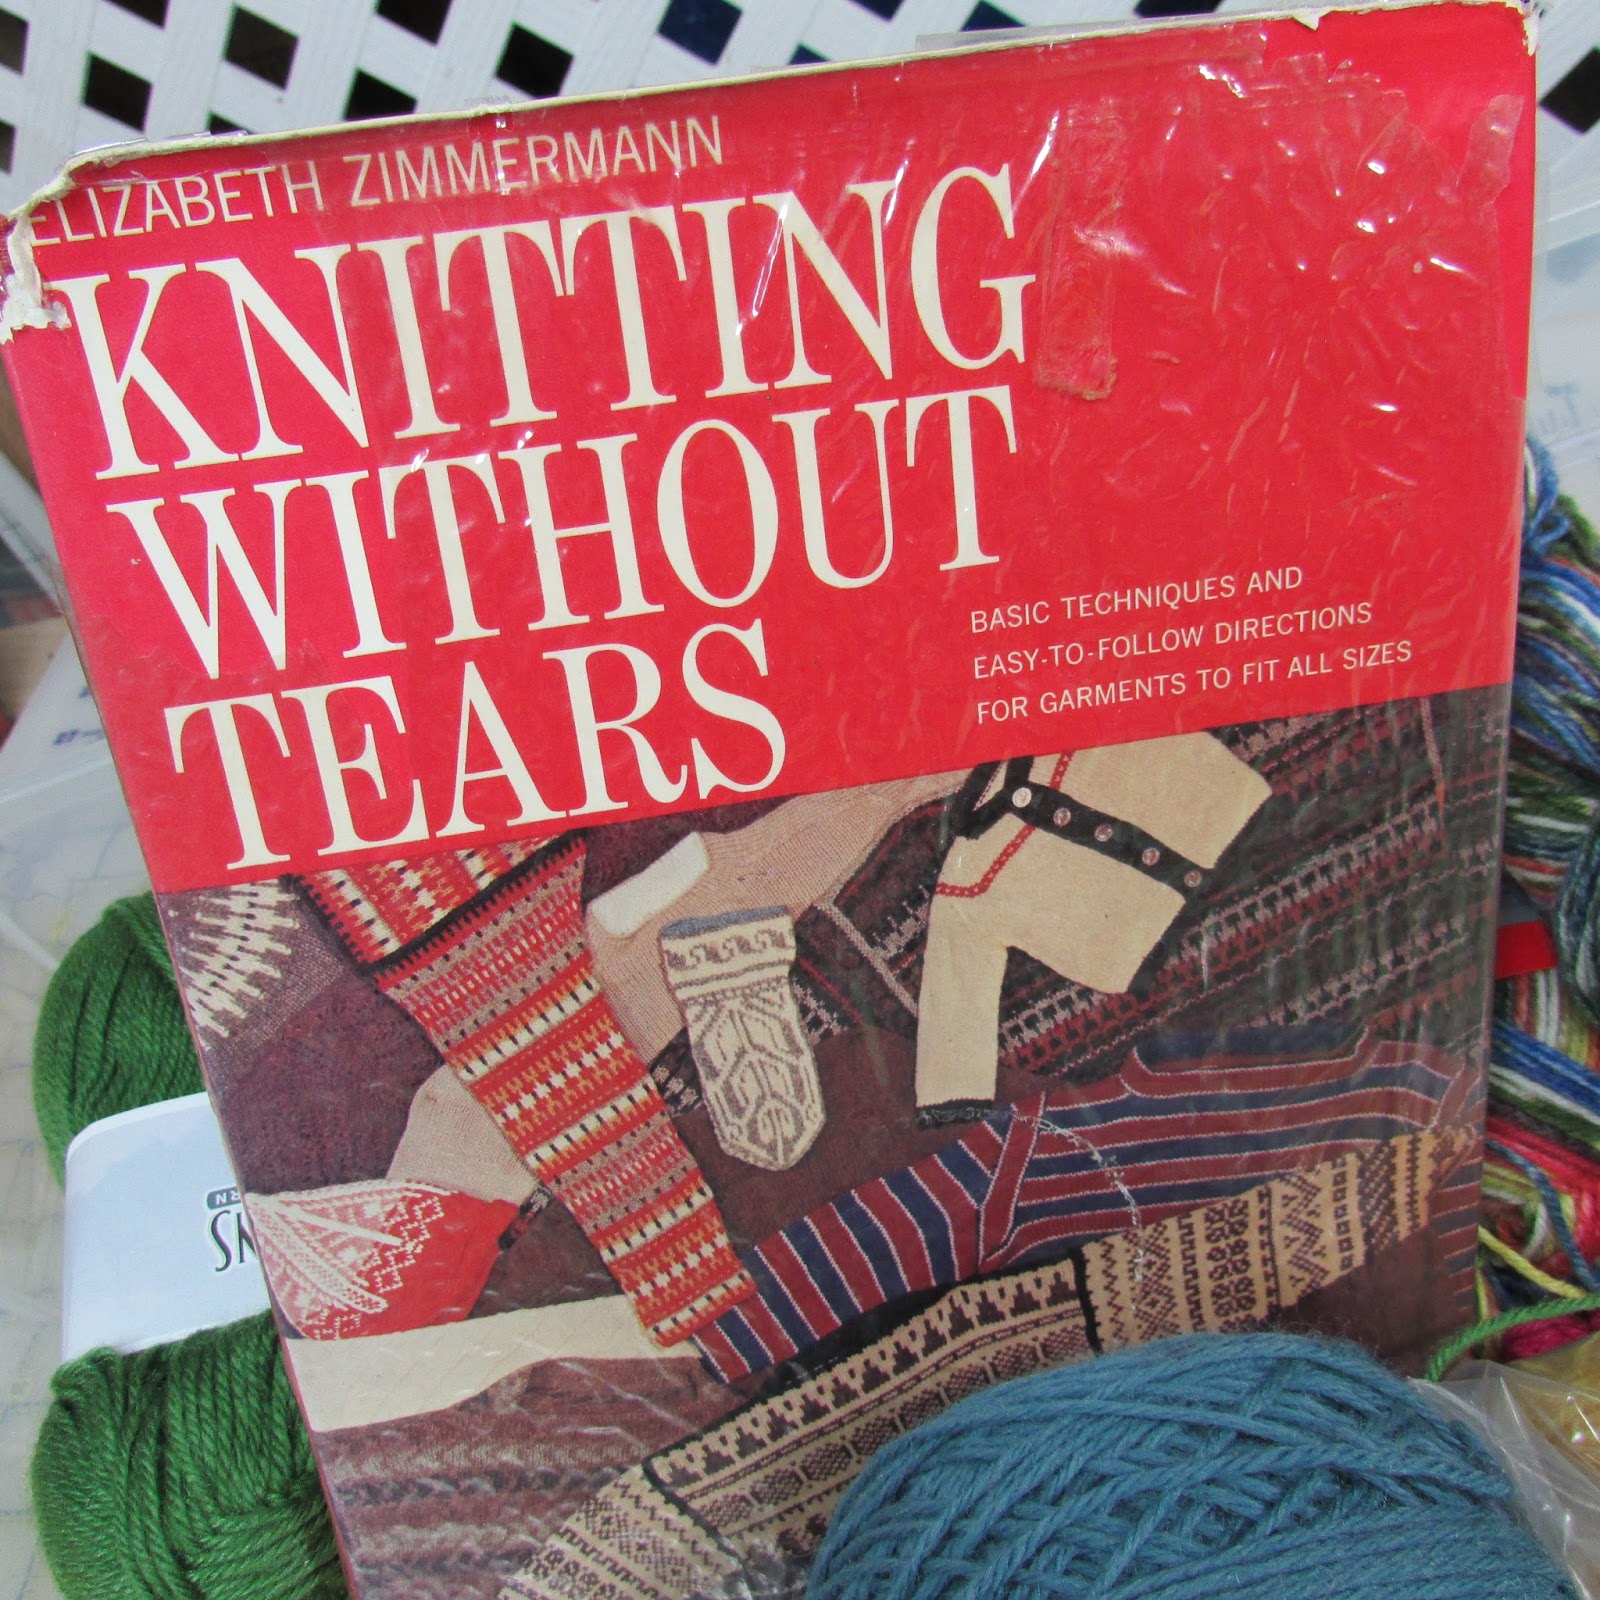 Knitting Books, Knitting Without Tears